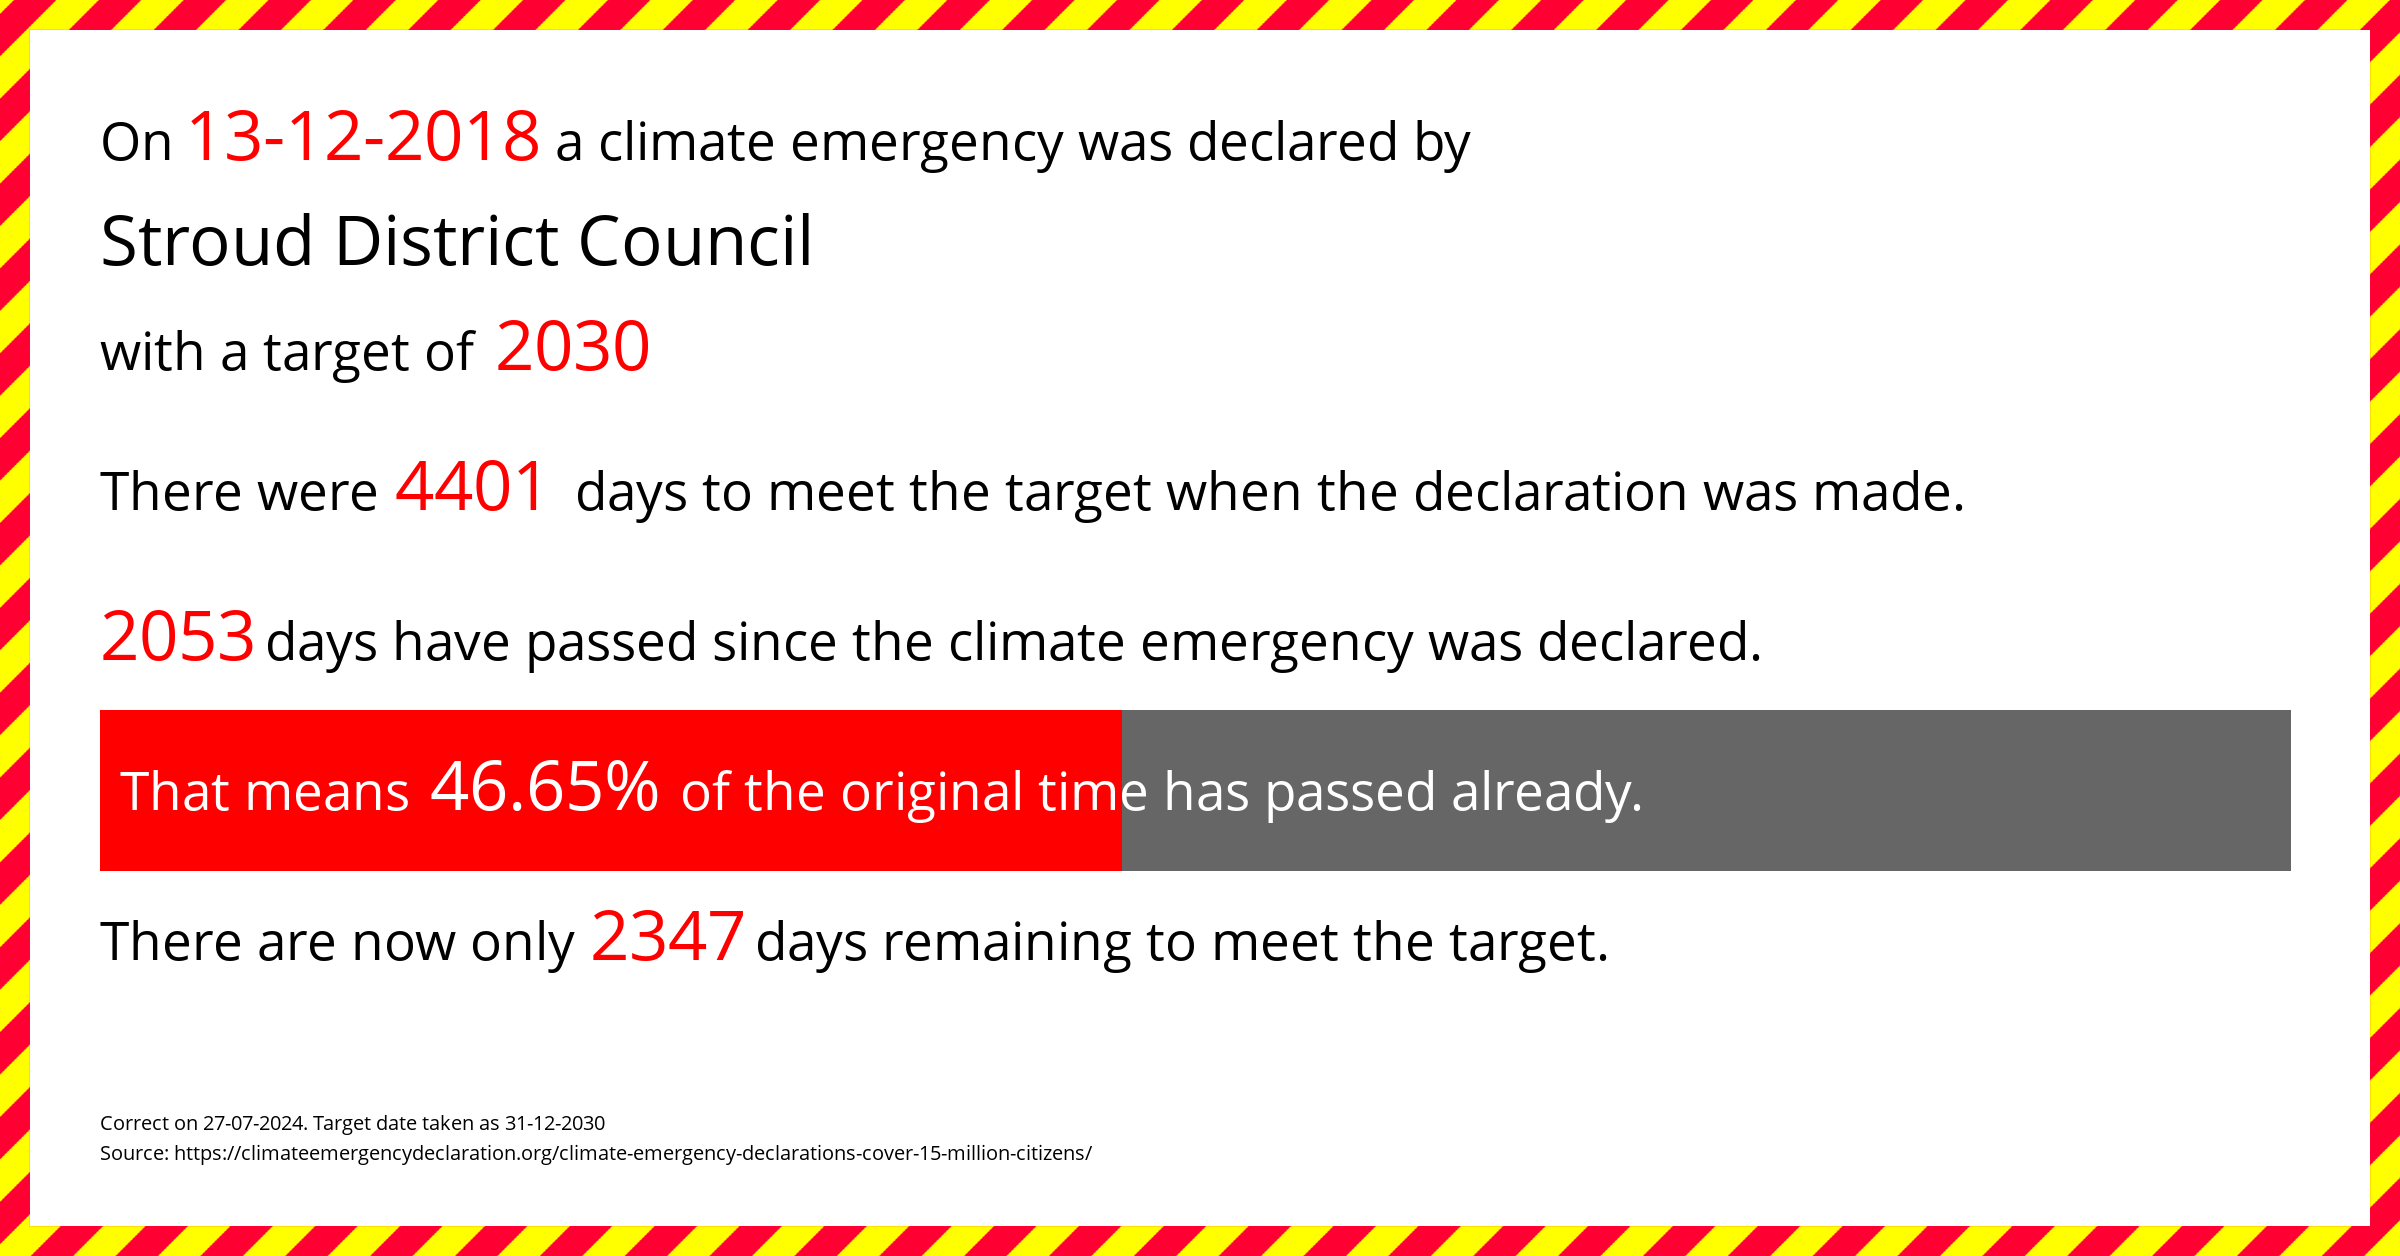 Stroud District Council declared a Climate emergency on Thursday 13th December 2018, with a target of 2030.